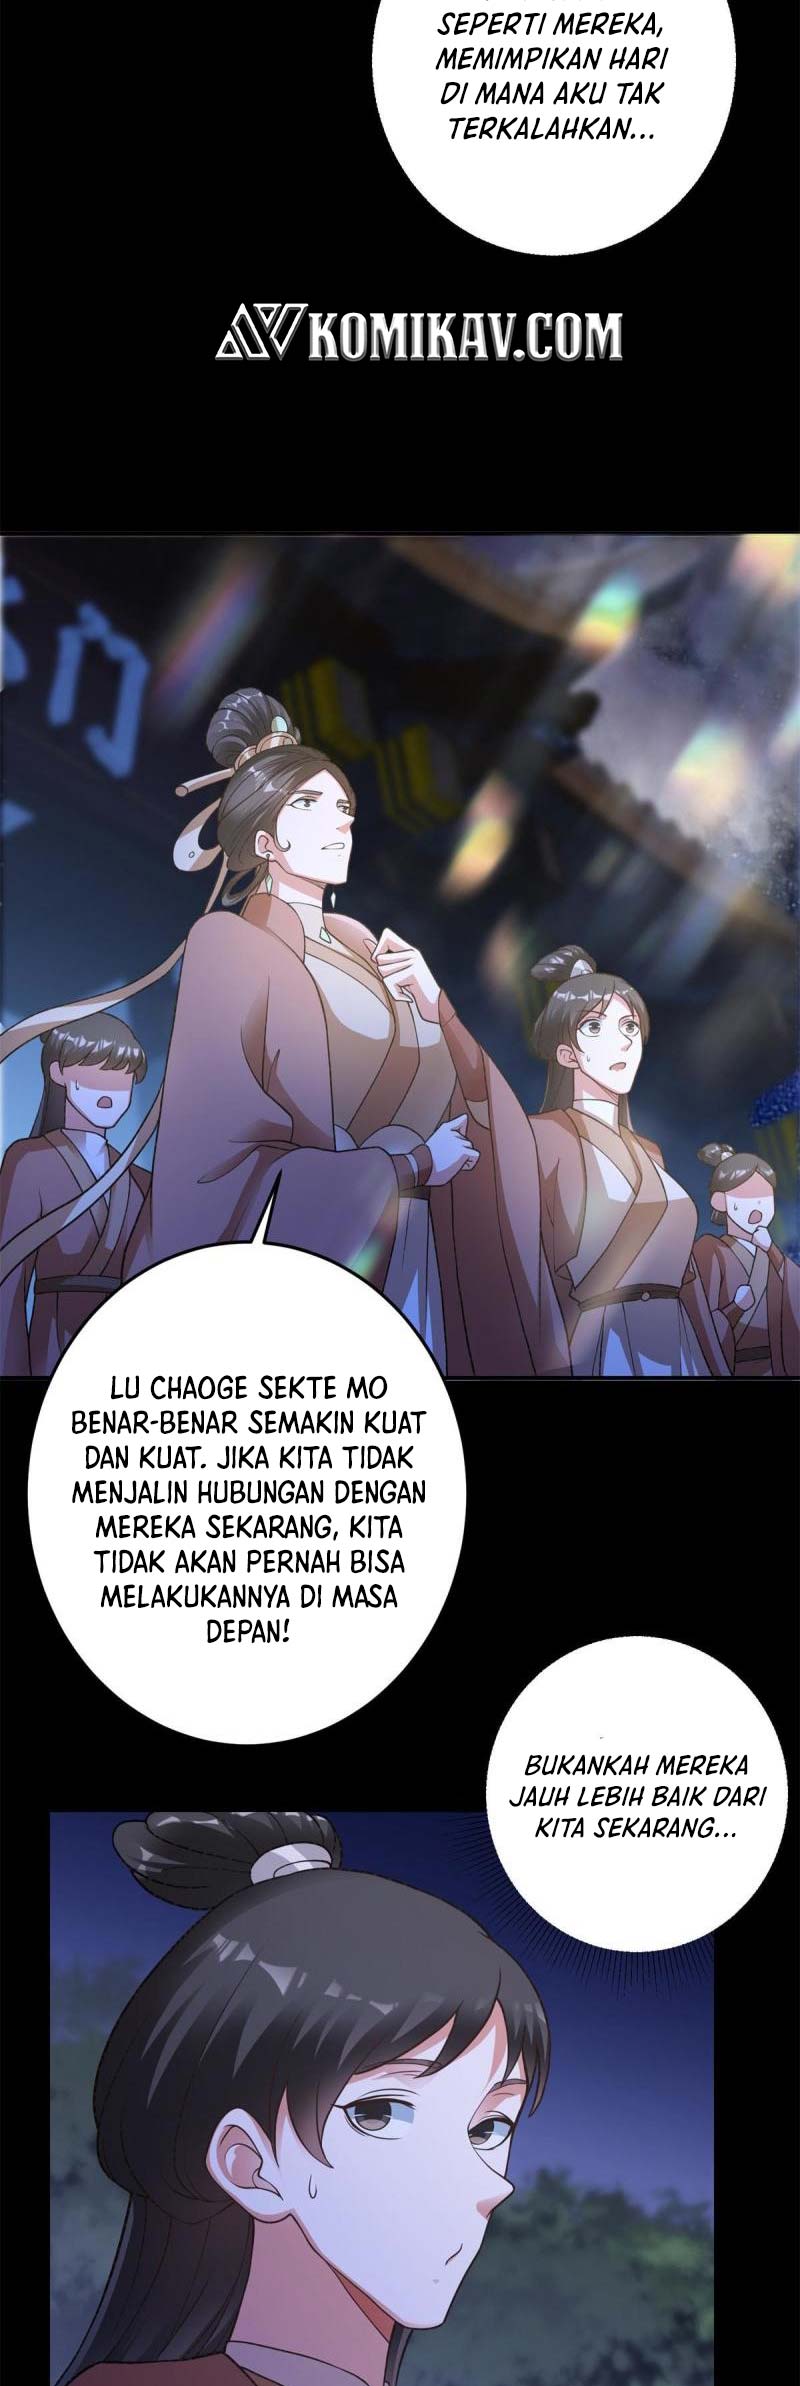 Keep A Low Profile, Sect Leader Chapter 175 Bahasa Indonesia